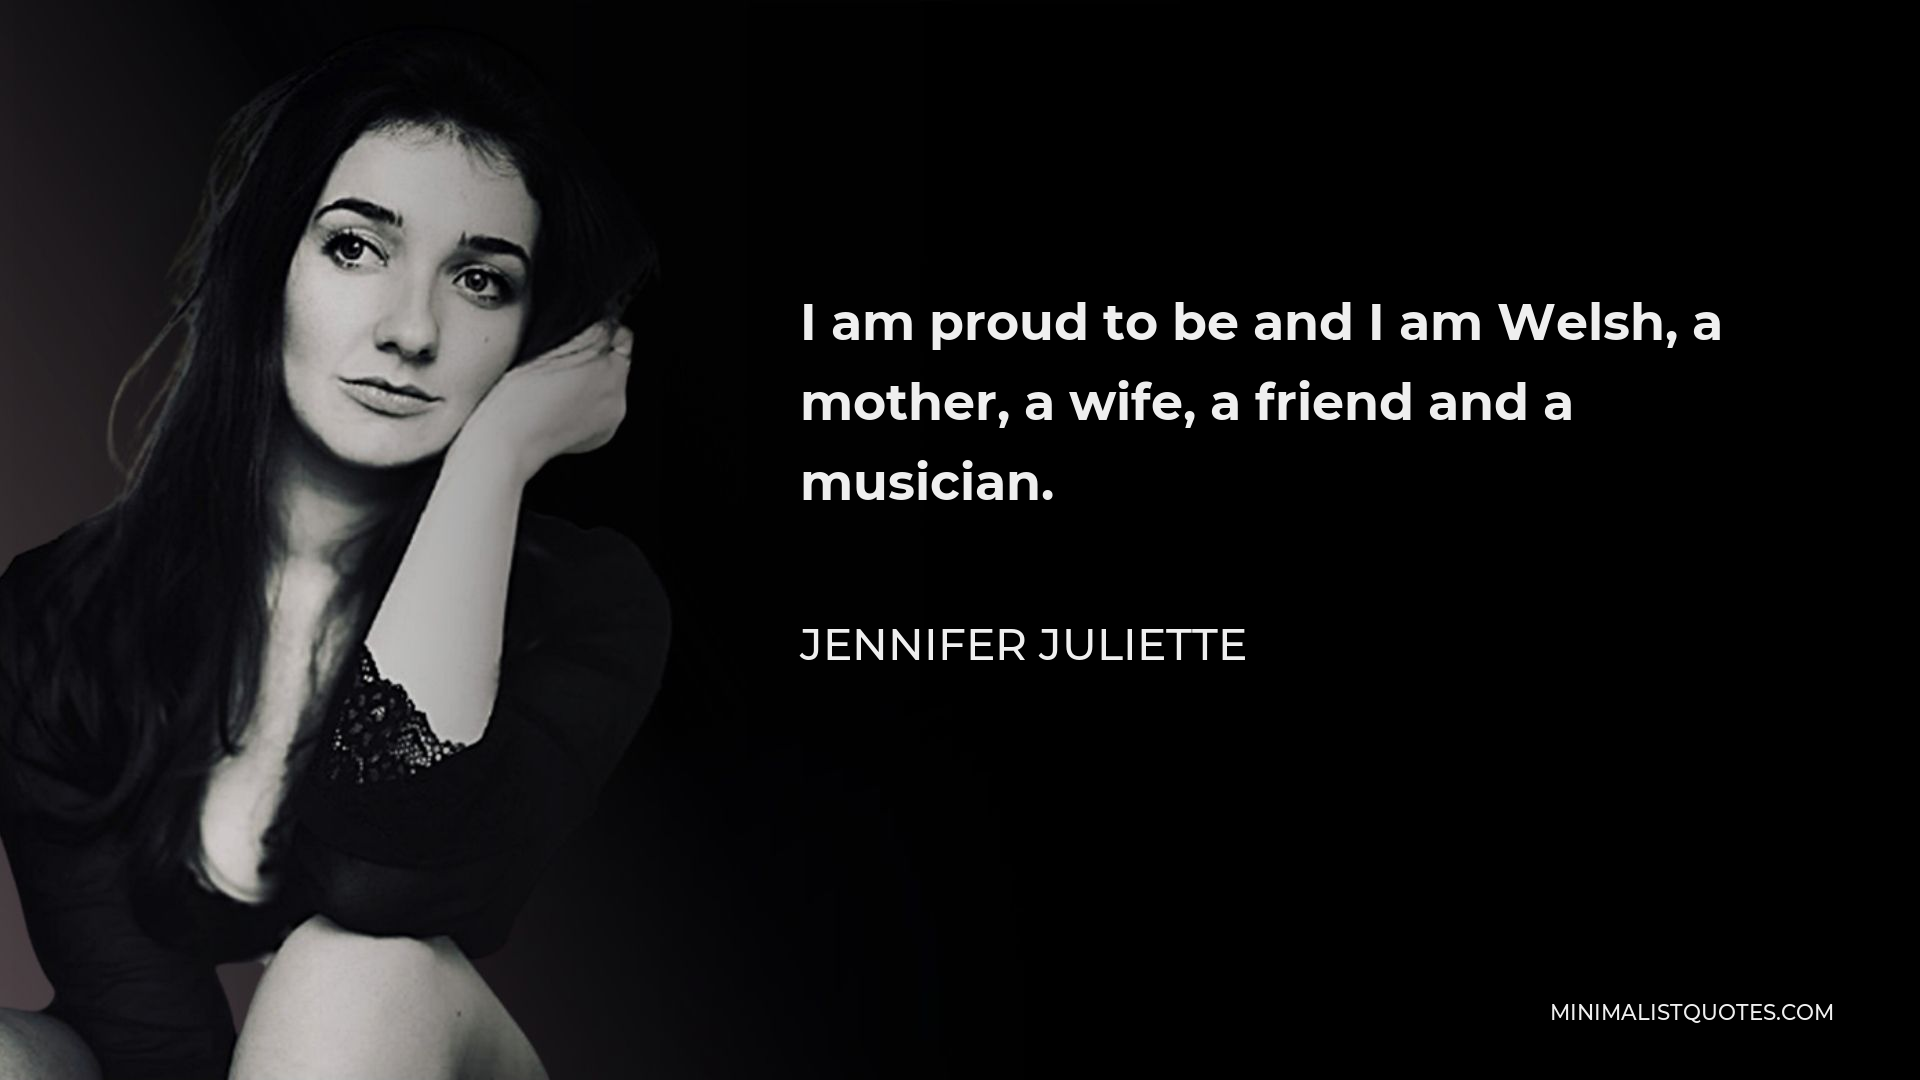 Jennifer Juliette Quote - I am proud to be and I am Welsh, a mother, a wife, a friend and a musician.